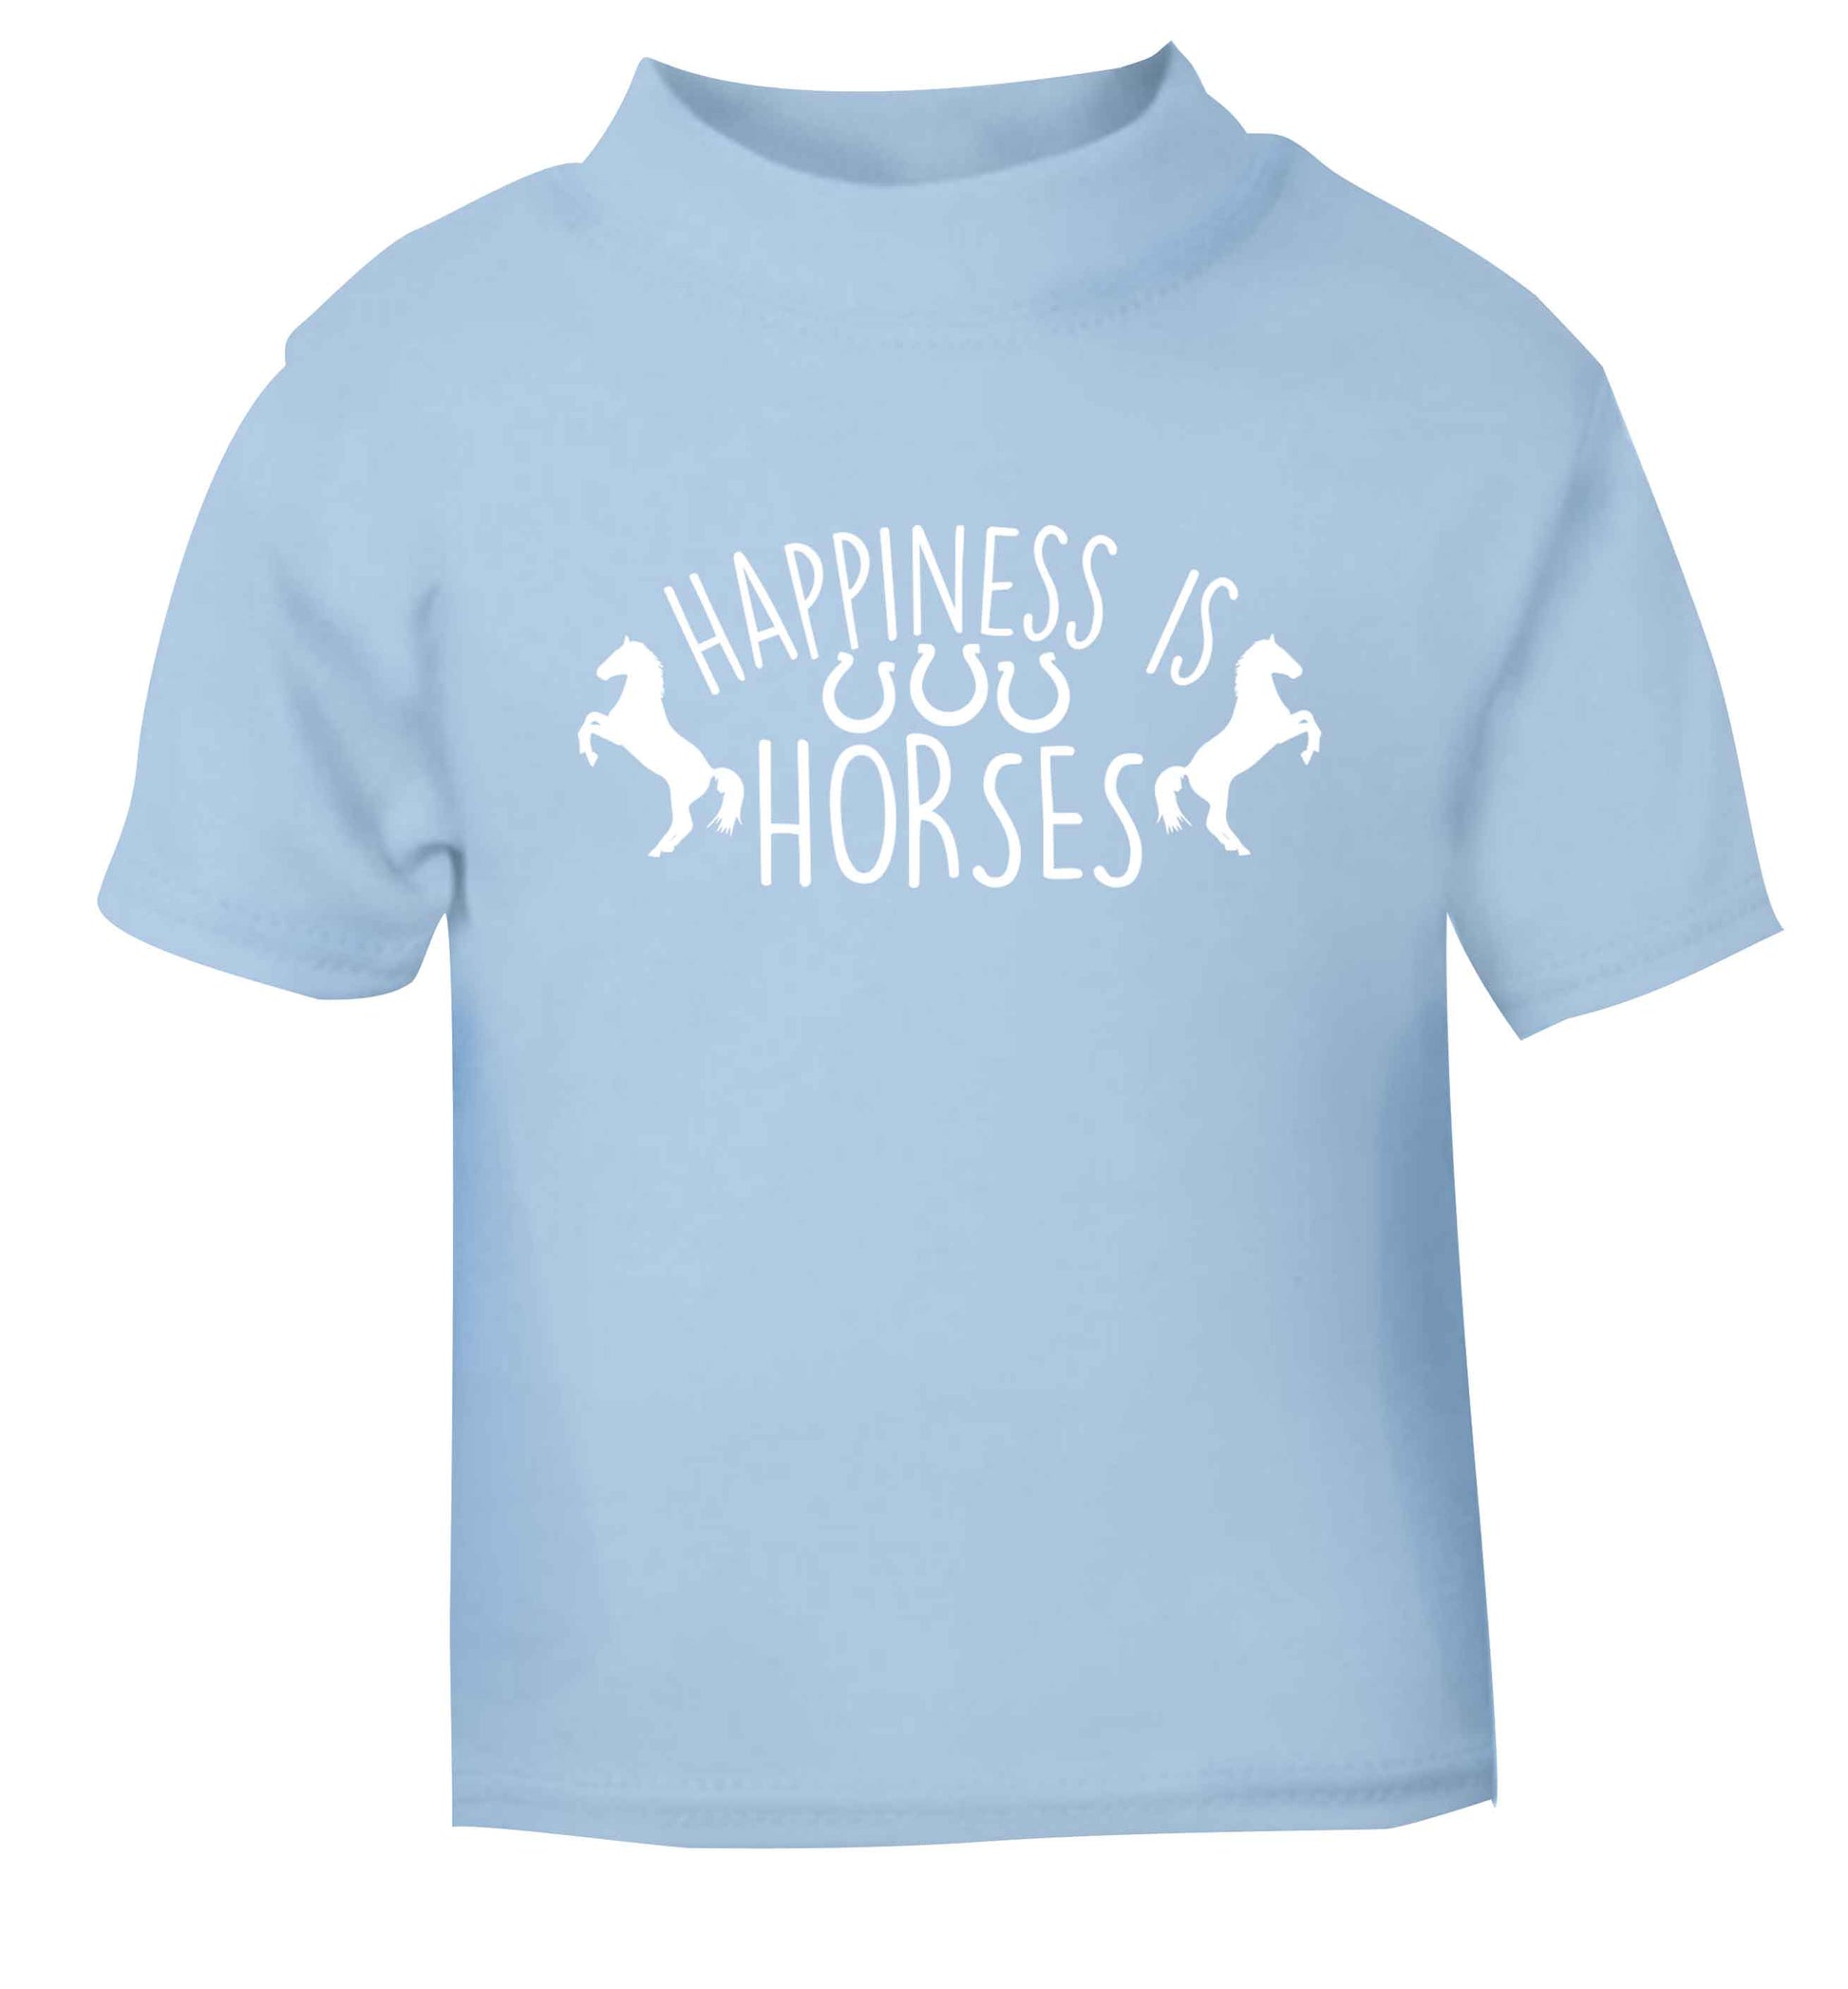 Happiness is horses light blue baby toddler Tshirt 2 Years